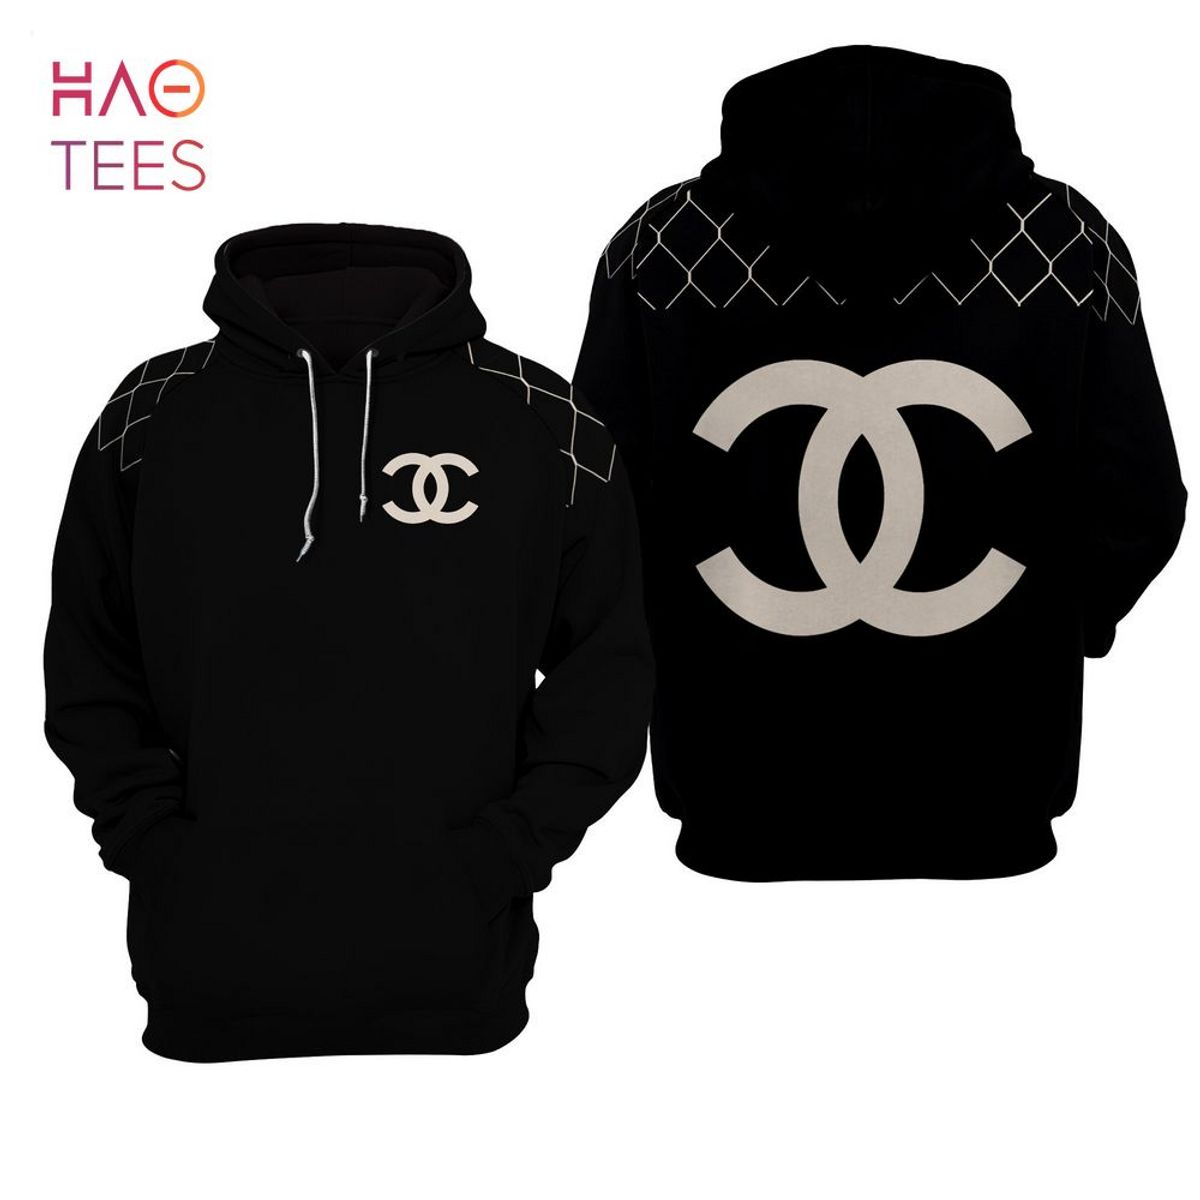 Chanel Name Zipped Hoodie for Sale by IMQFourteenth